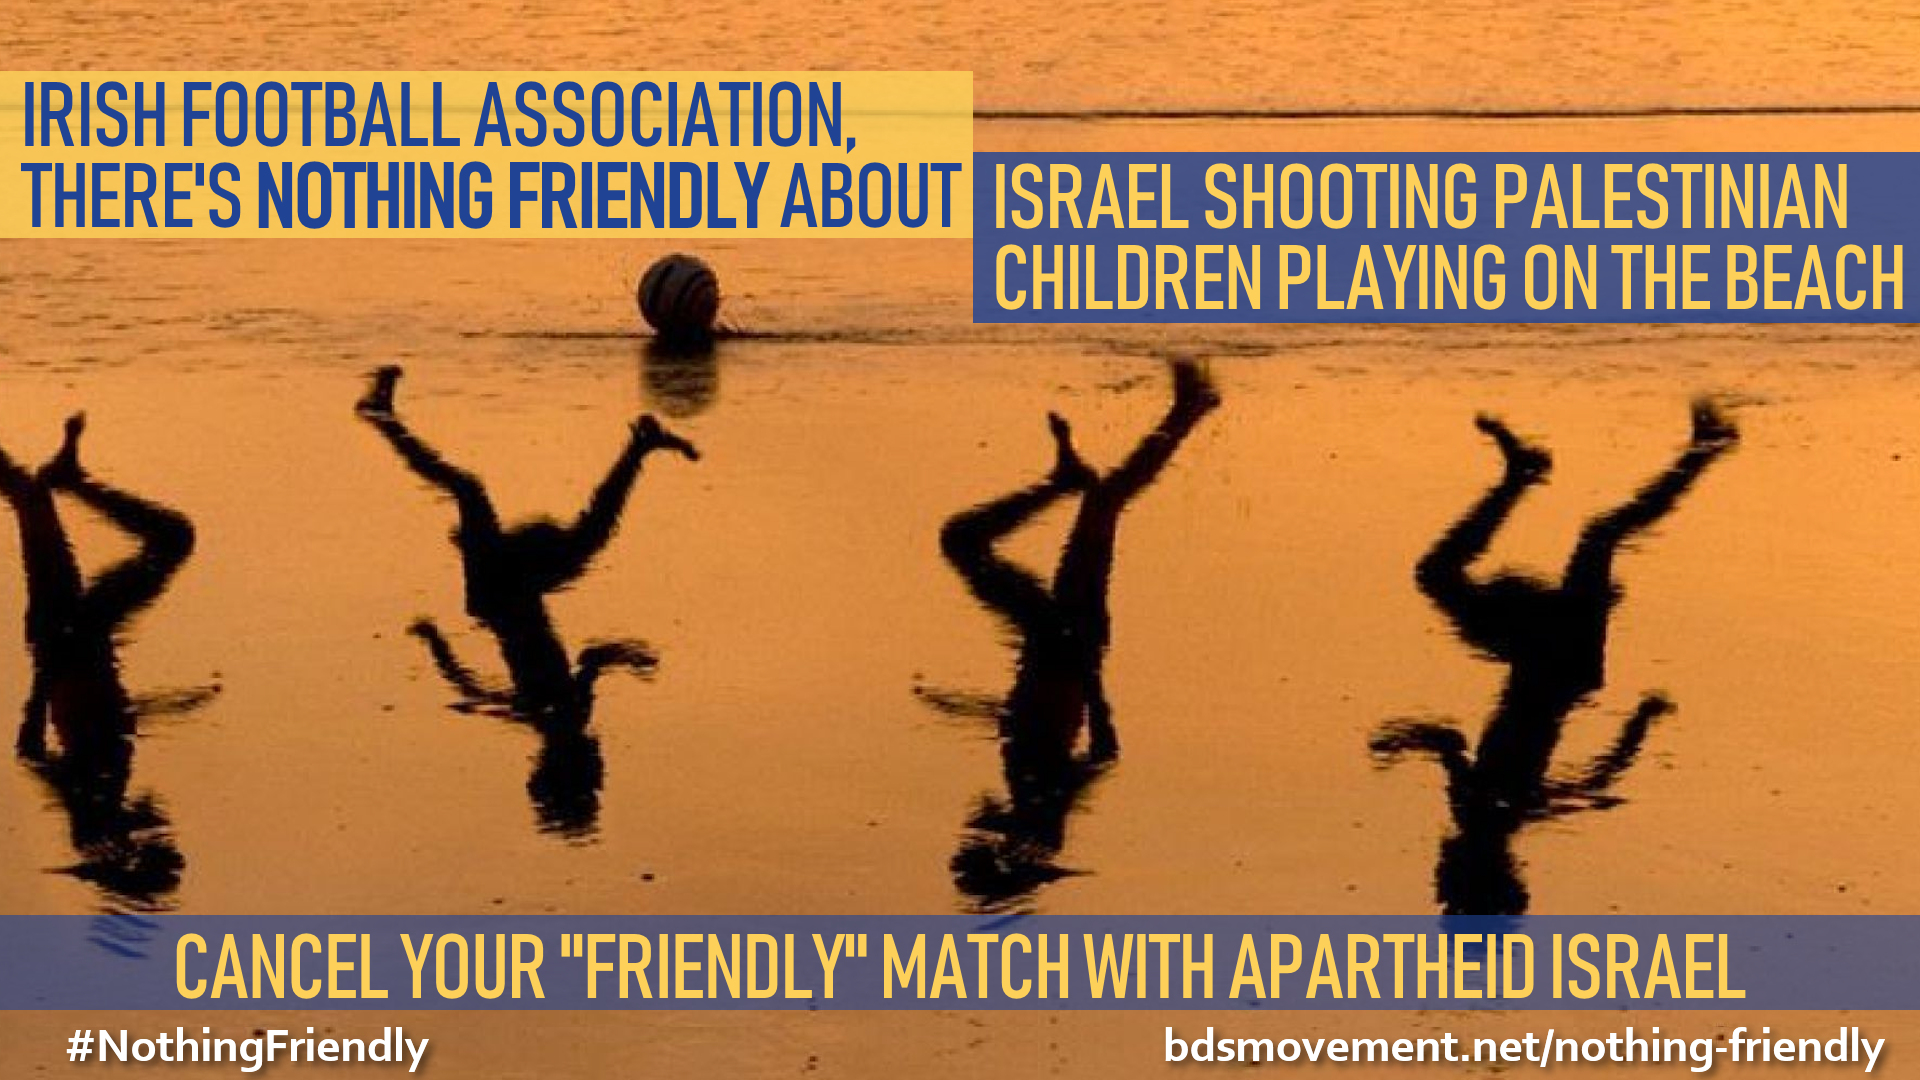 Irish Football Assoc, there's nothing friendly about shooting Palestinian children playing football on the beach